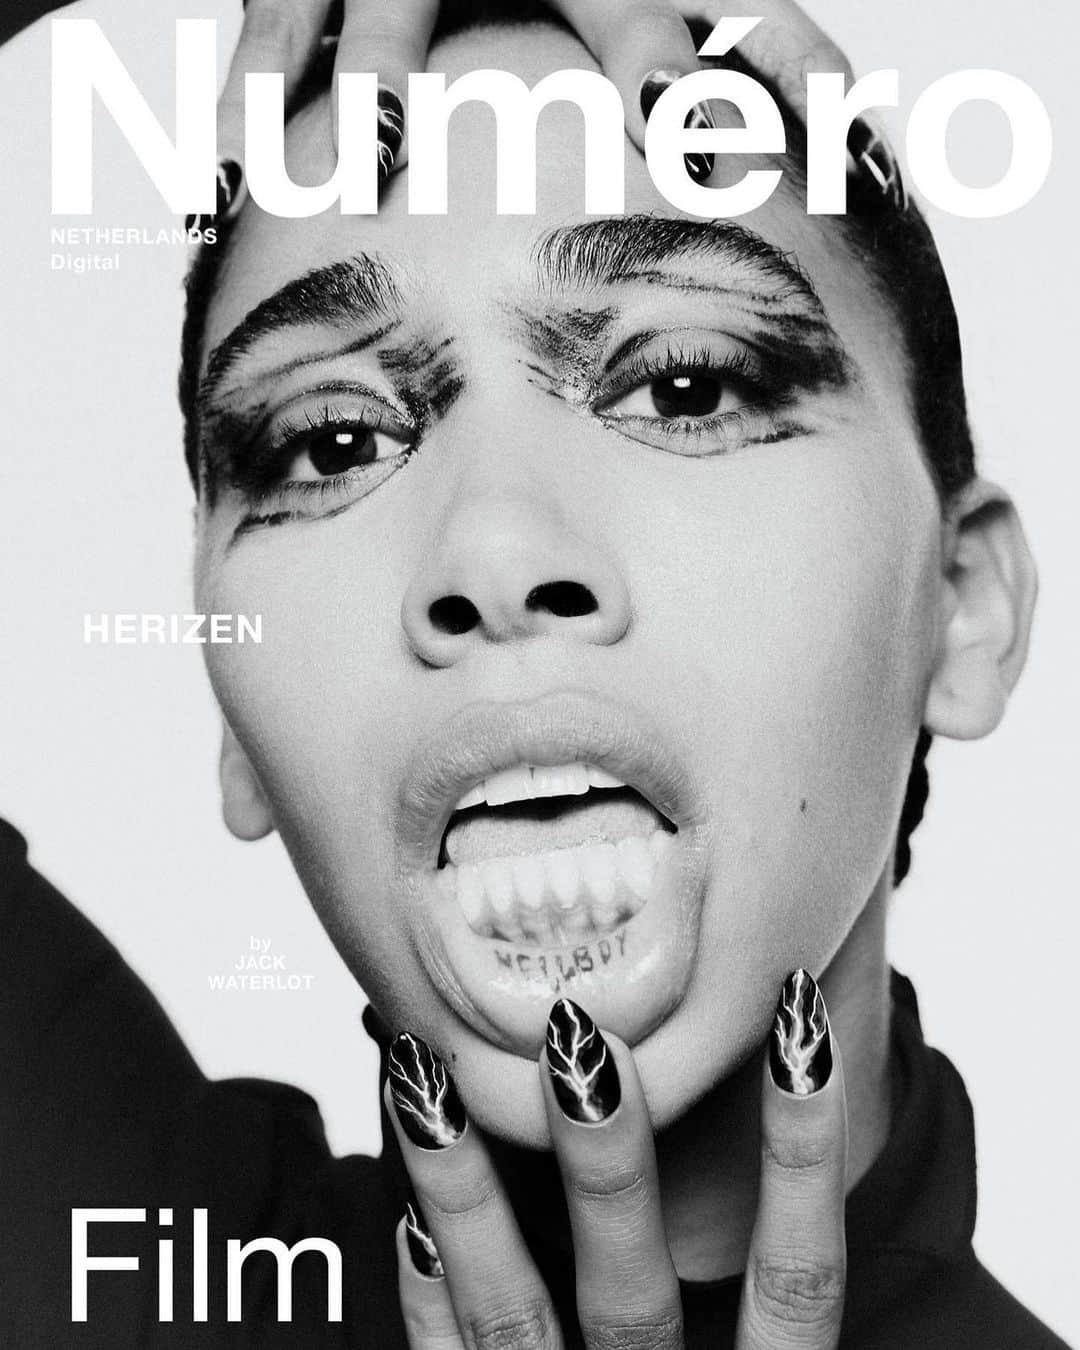 Herizen Guardiolaのインスタグラム：「Thank you @numero_netherlands the awesome cover collab🖤 much love @jackwaterlotstudio for an awesome fun photoshoot and @jeanalina for the style🤝 enjoy 😜  .................... Editor @timiletonja  Photo assistant: @shanerooney.nyc Hair: @ritamarmor  Make up: @frankieboyd  Nails: @speakeasynailsnyc  Thank you all🖤」